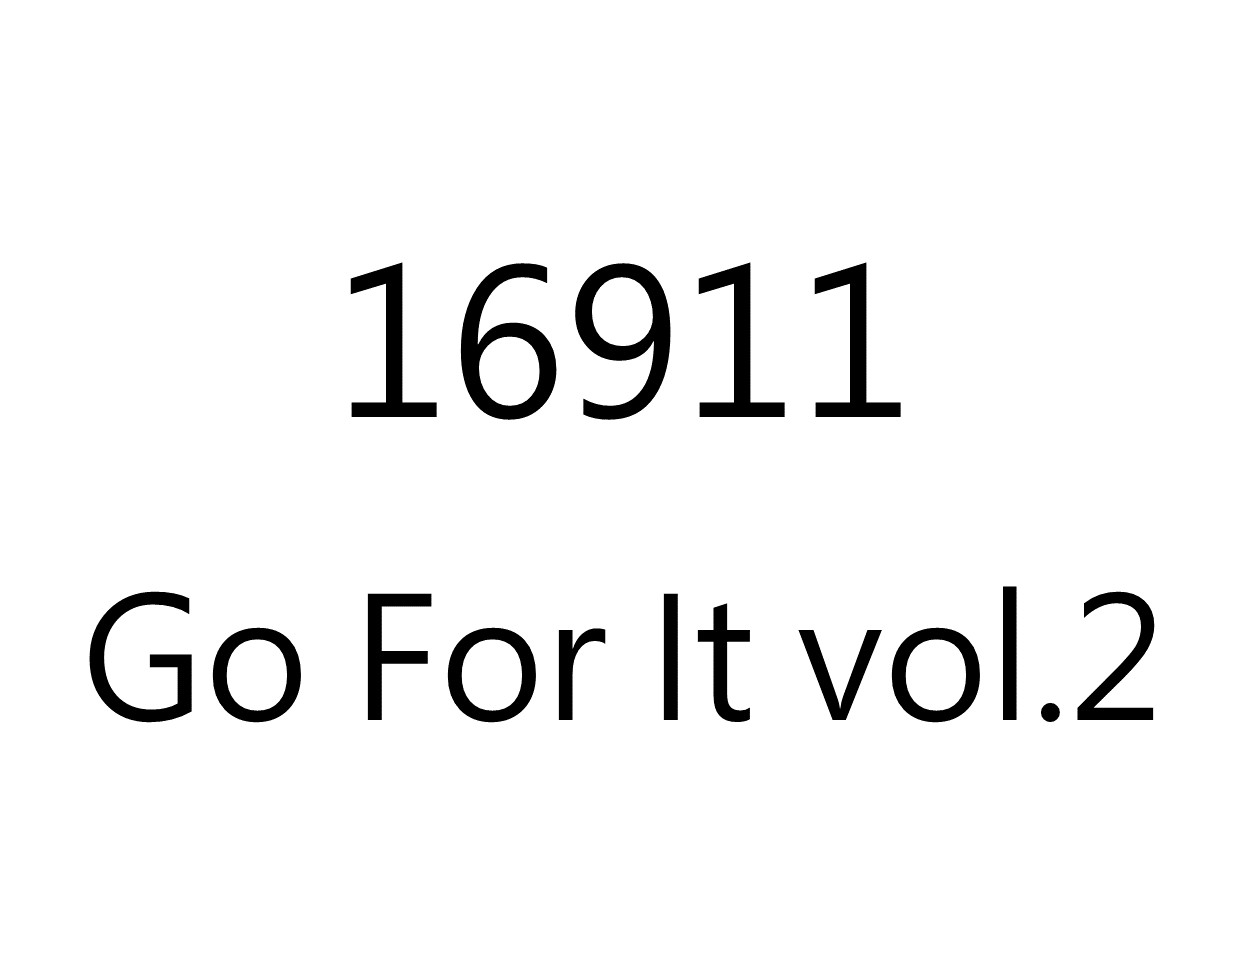 16911 Go For It Vol.2